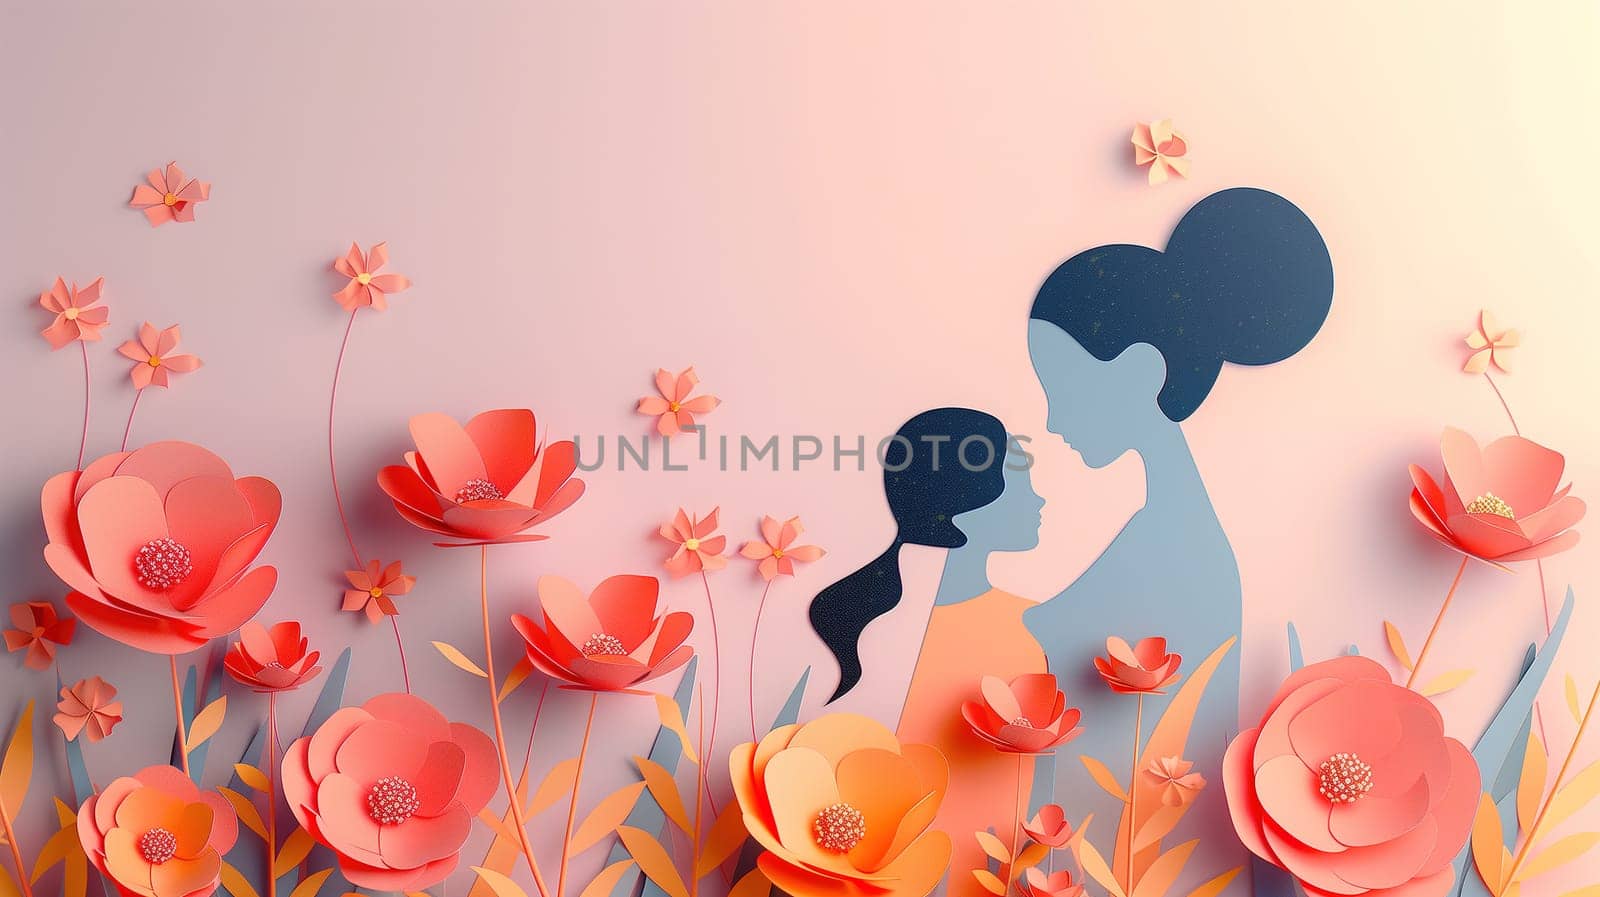 A detailed paper cutout of a mother lovingly holding her child in a vibrant field of colorful flowers. The intricate design captures the bond between the two figures against a backdrop of nature.